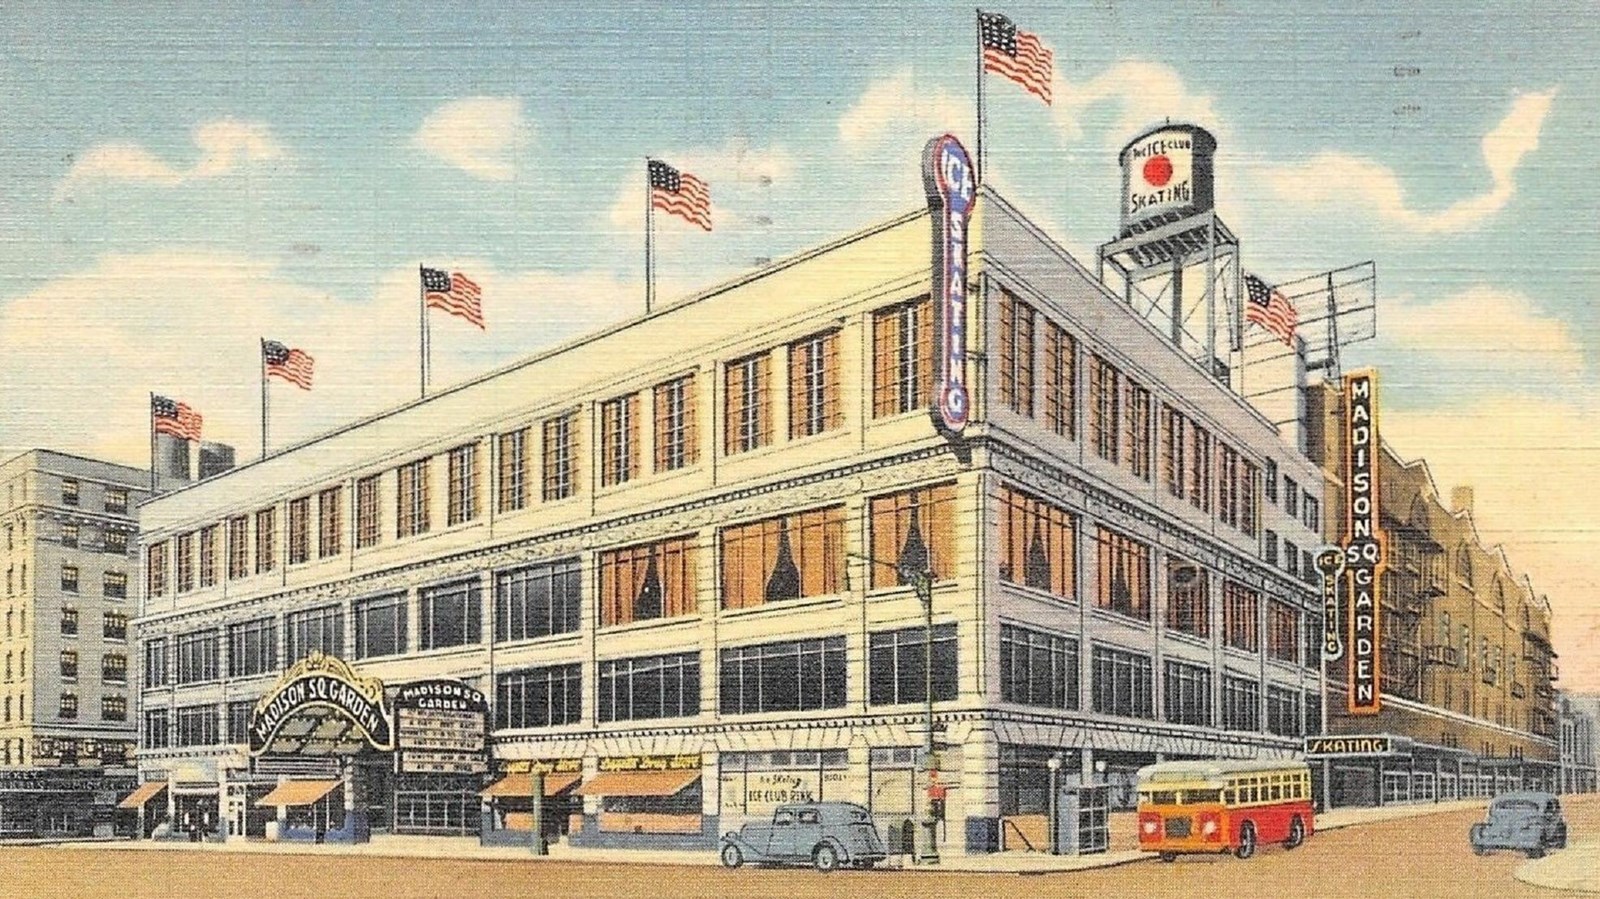 Illustrated image of square building with American flags lining the top